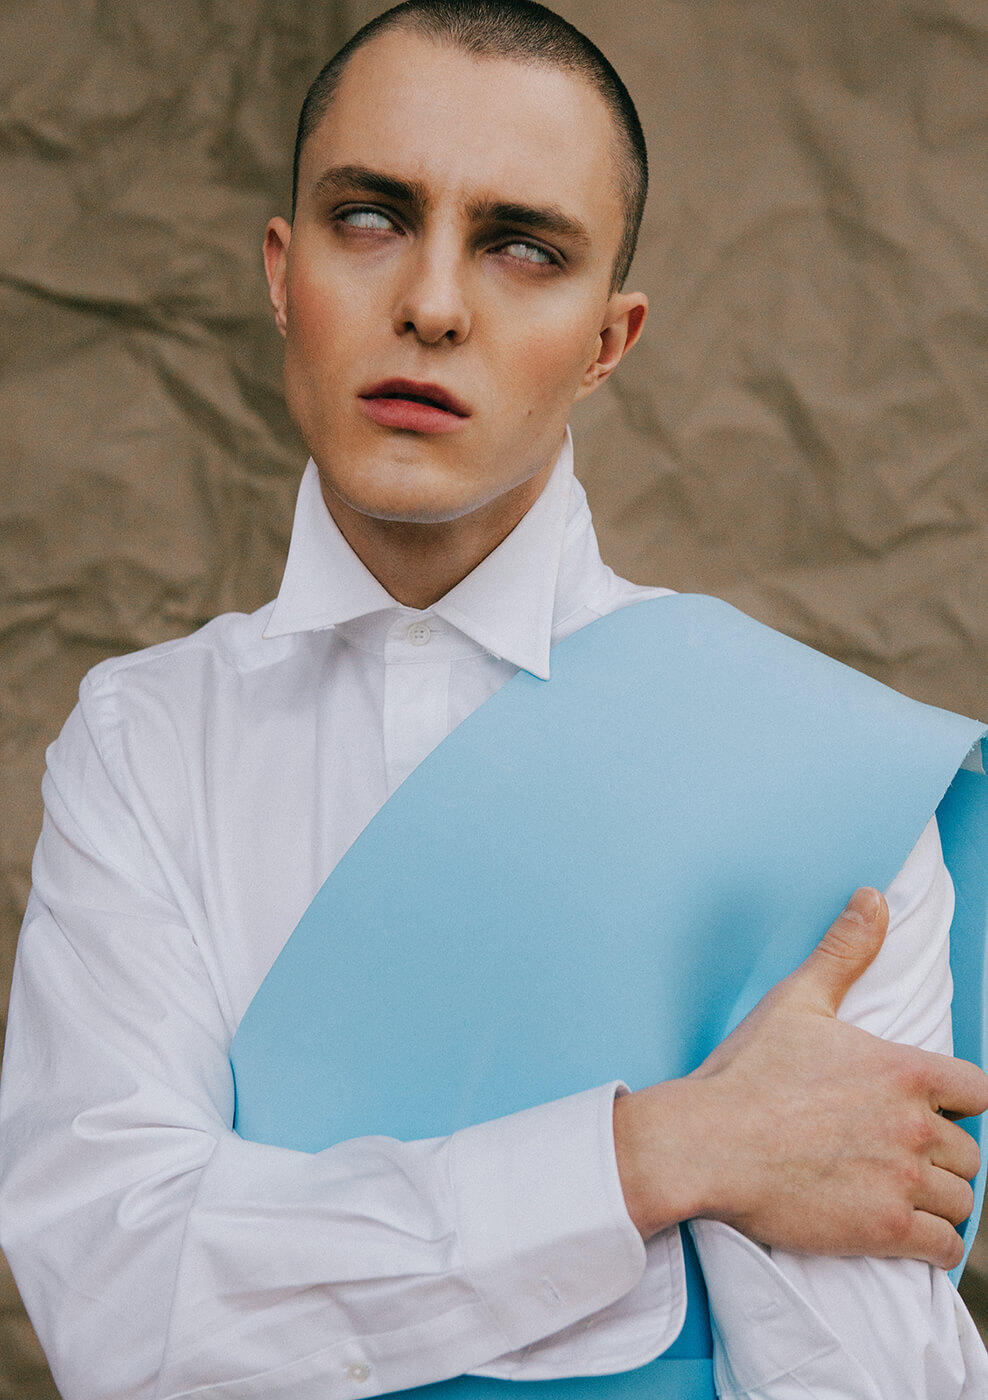 An editorial image of man posing in the studio wearing designer clothing and rolling his eyes